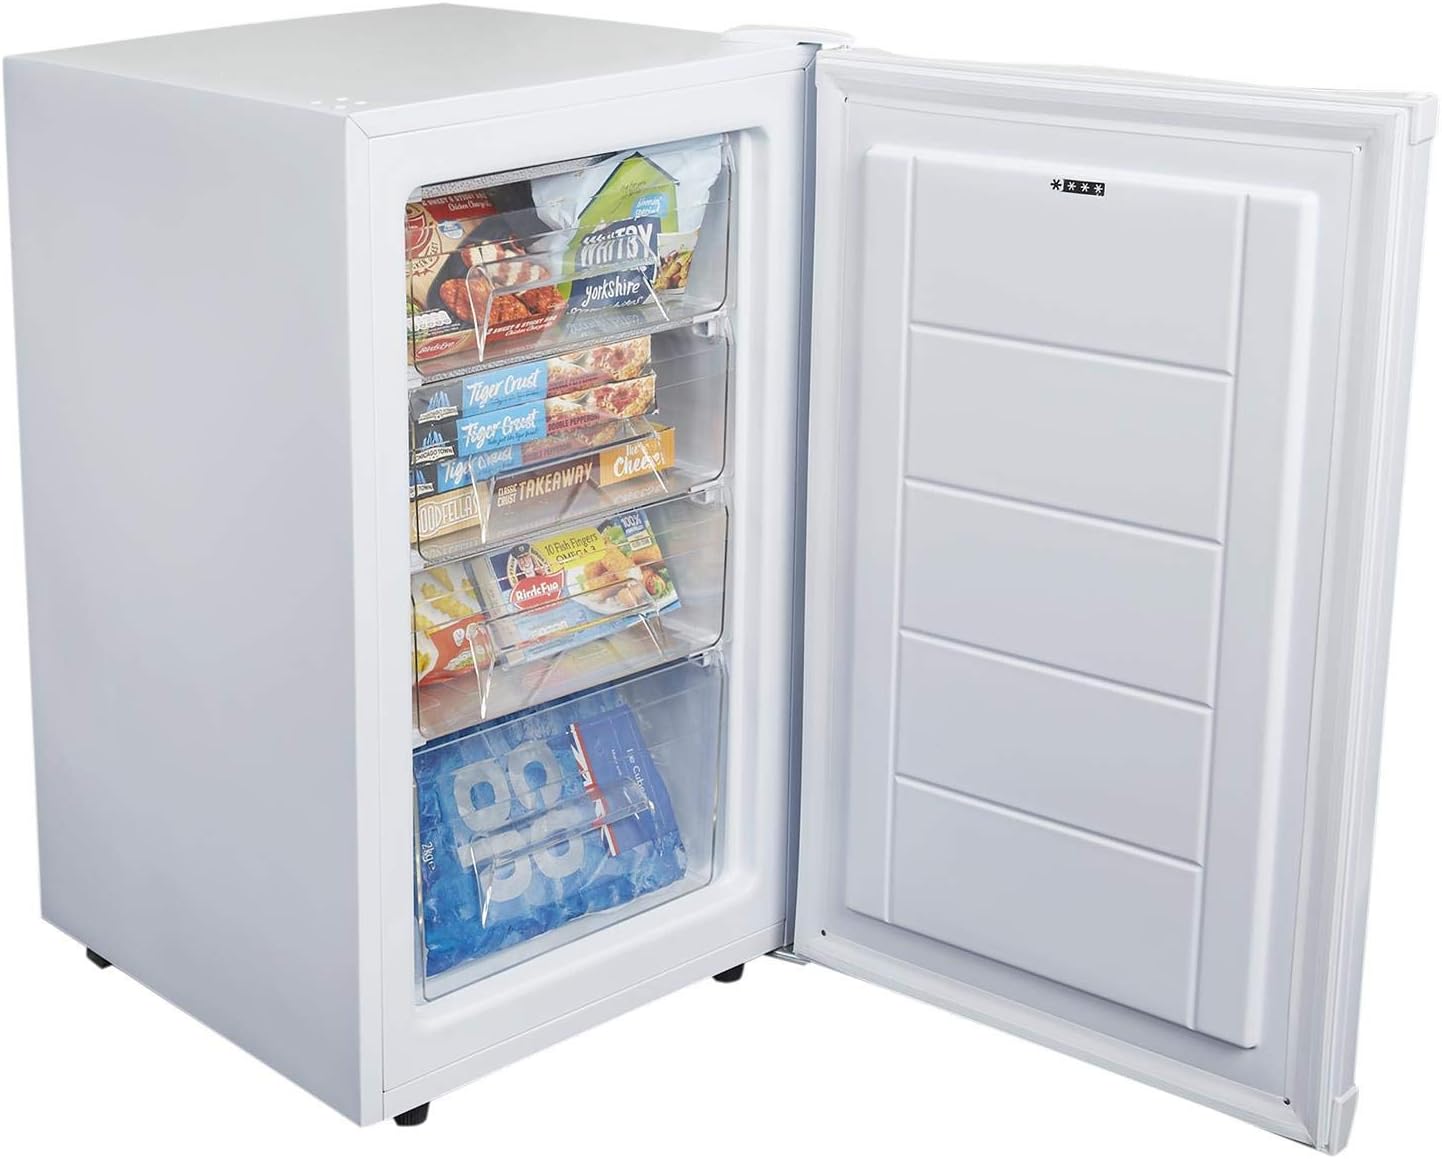 SIA UCF50WH 50cm White Freestanding Under Counter Freezer 80L - Amazing Gadgets Outlet